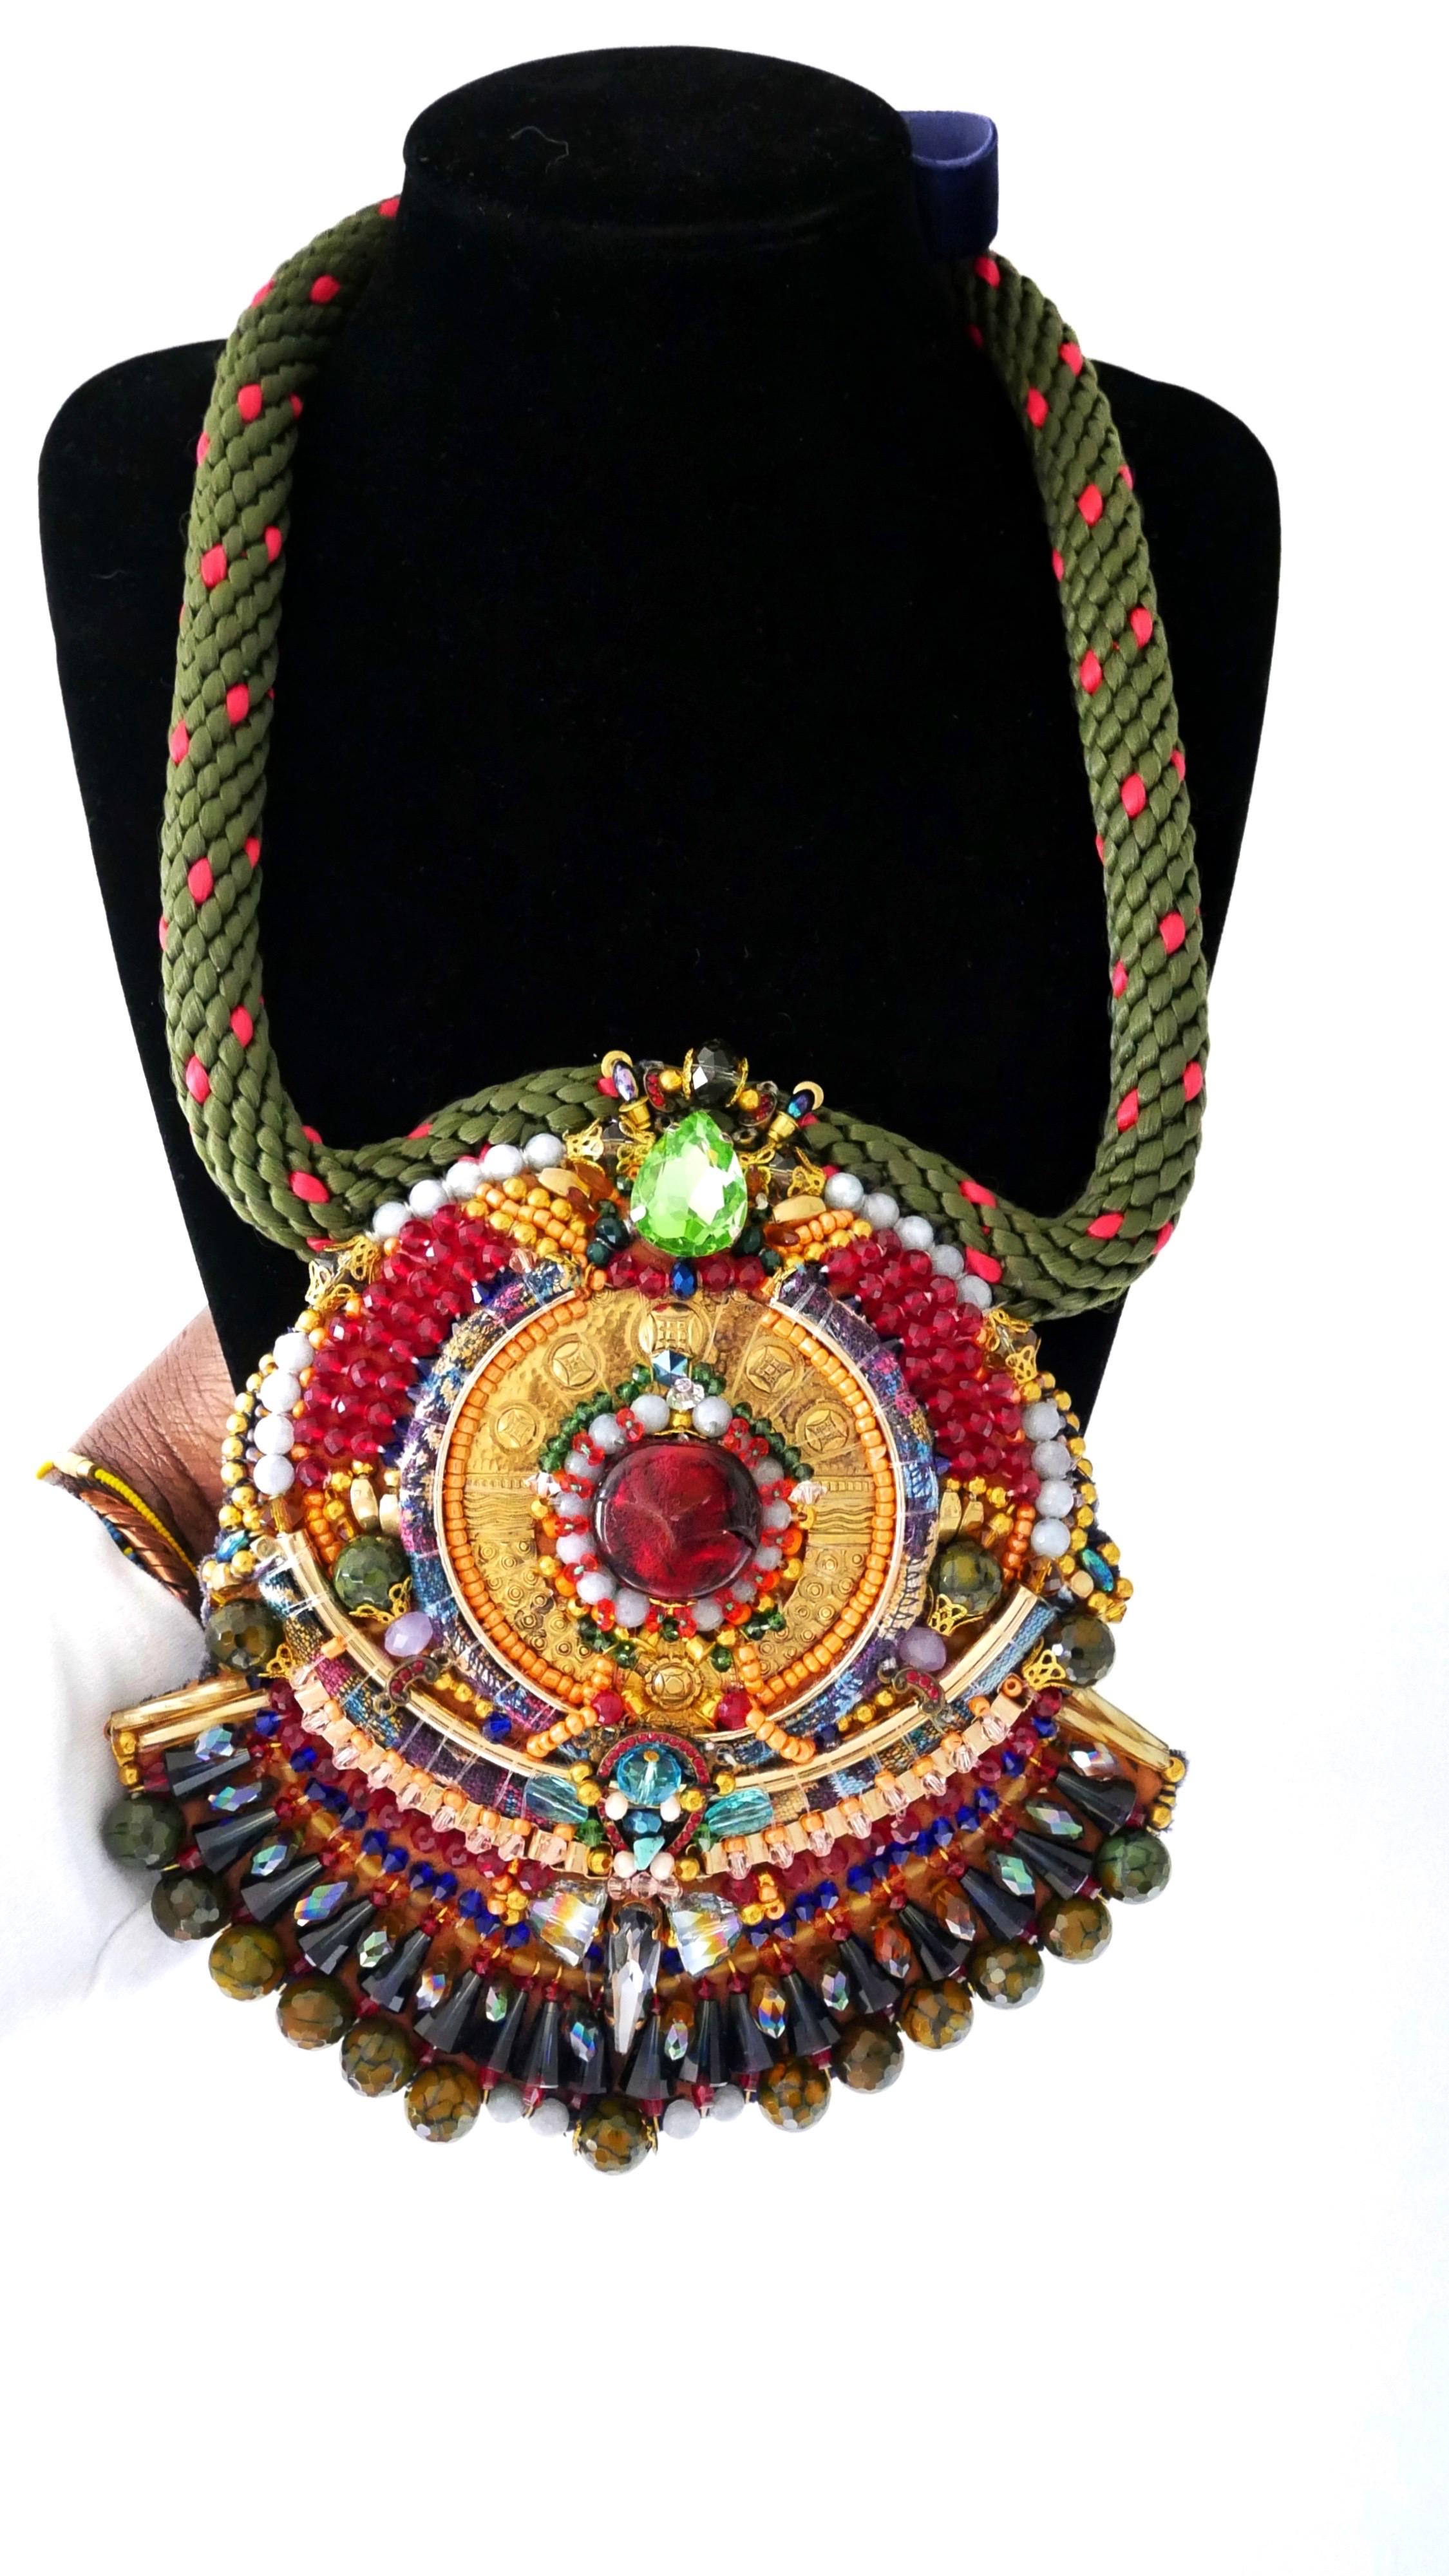 This spectacular bib collar necklace is the perfect complementary neck adornment for your impeccable persona and style.
Why is this special, you ask? Not only does this richly jewelled timeless neckpiece has all the great qualities that make it rare